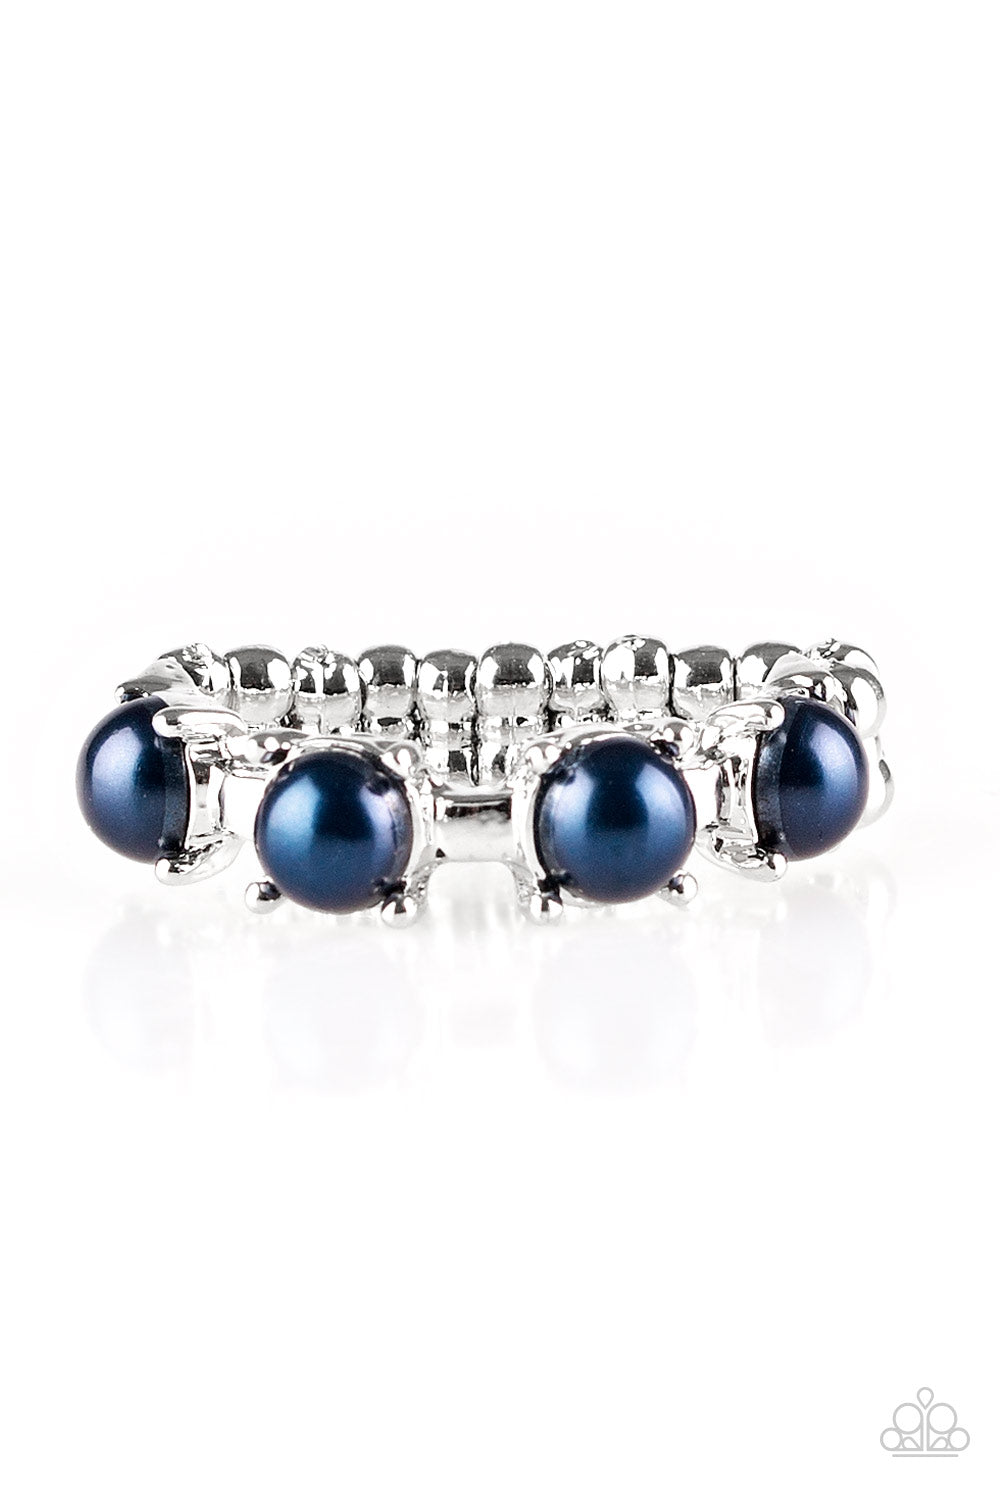 More Or PRICELESS - Blue Pearl Bead Ring - Paparazzi Accessories